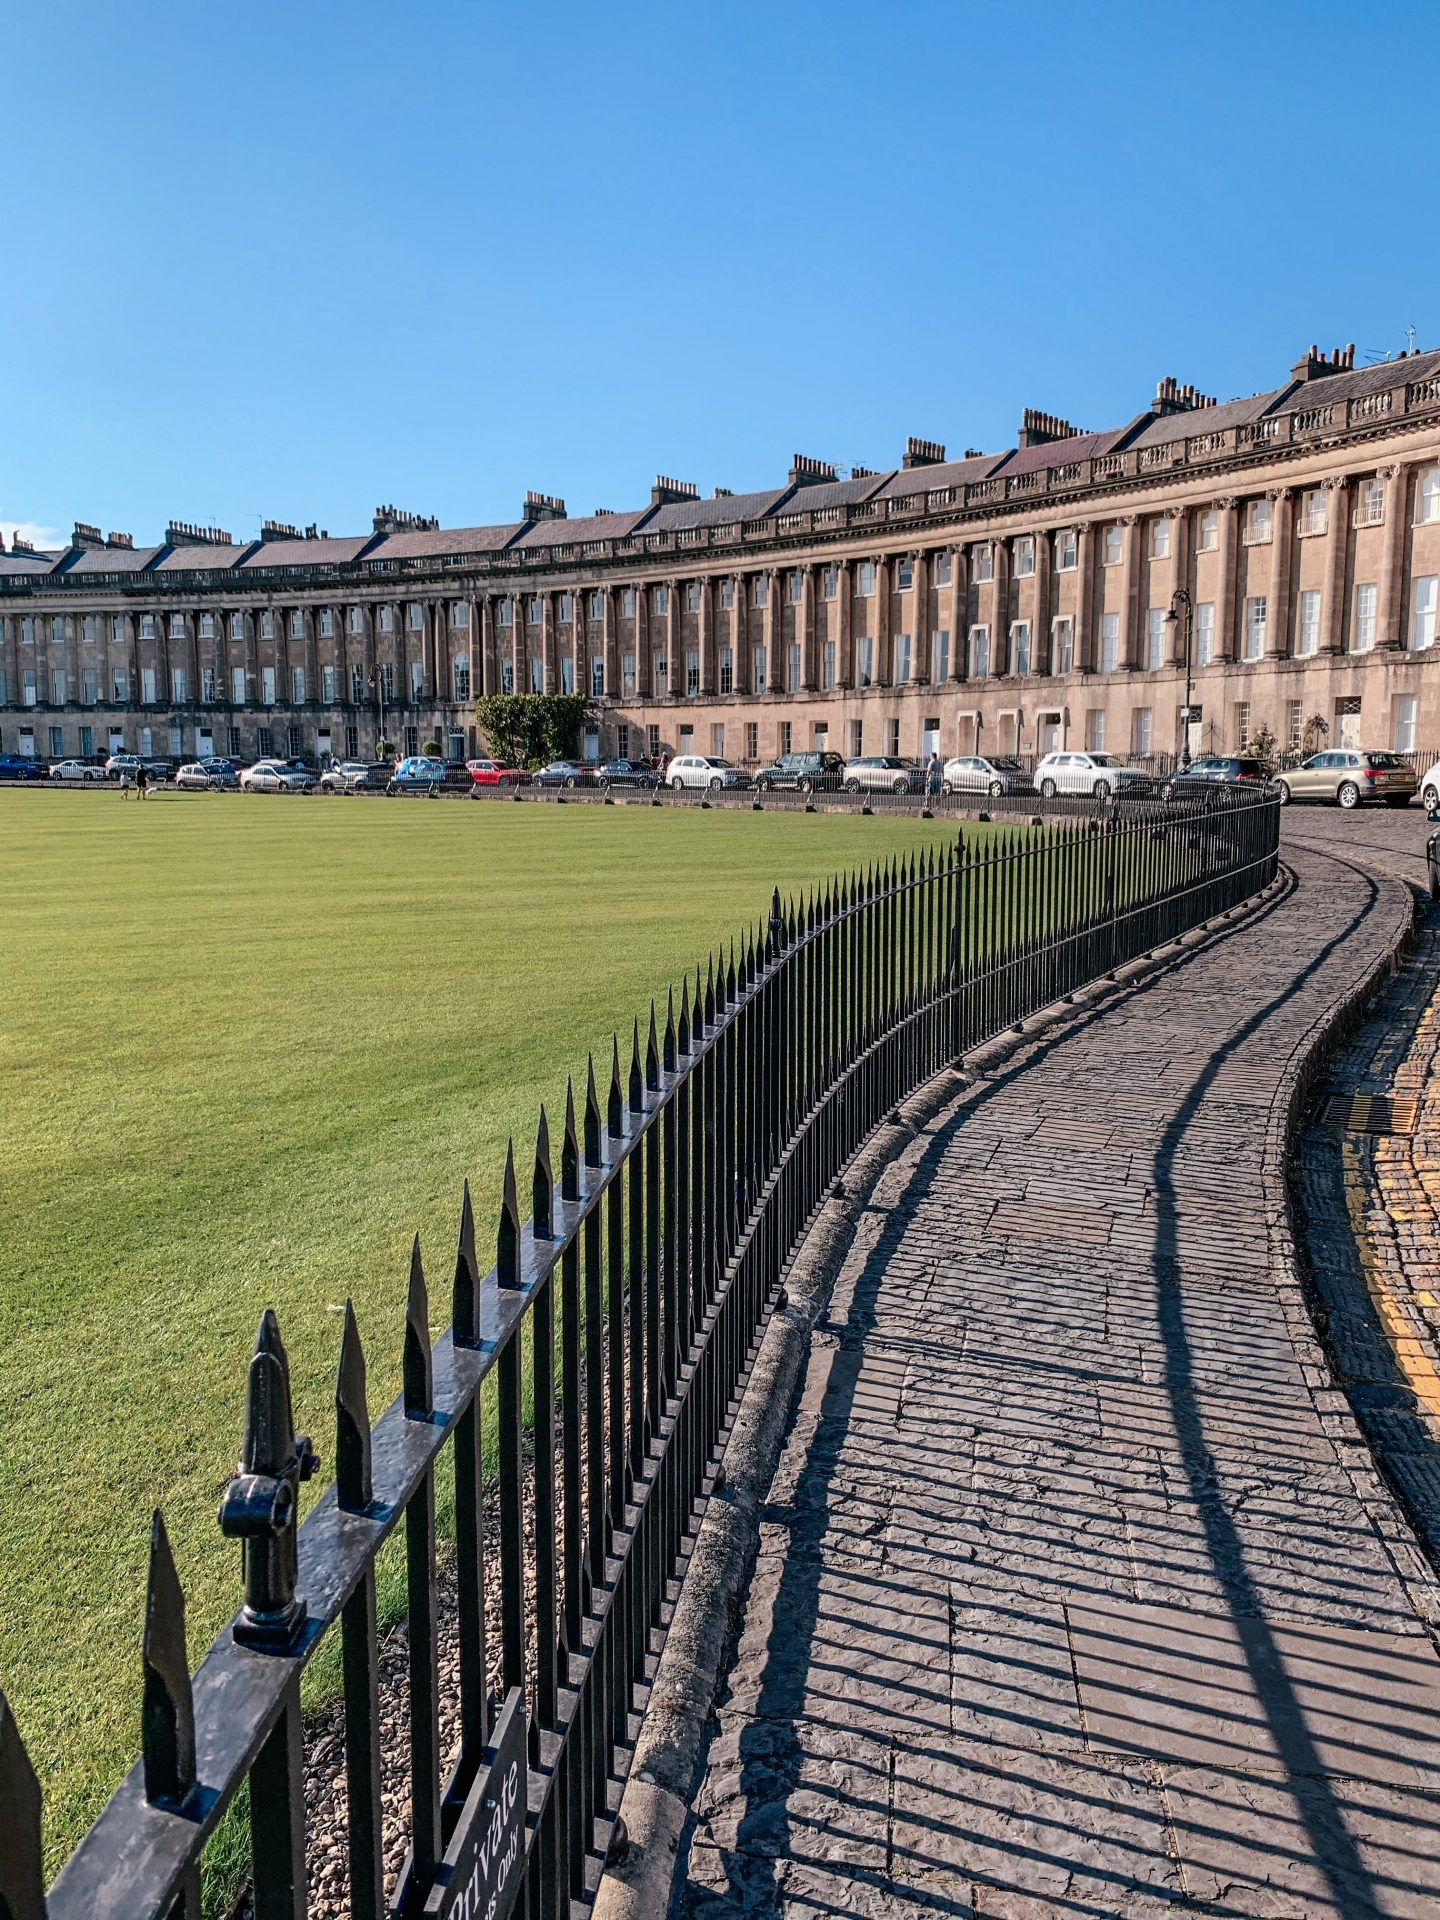 The Royal Crescent, Somerset, England One of Bath's most iconic architectural landmarks.